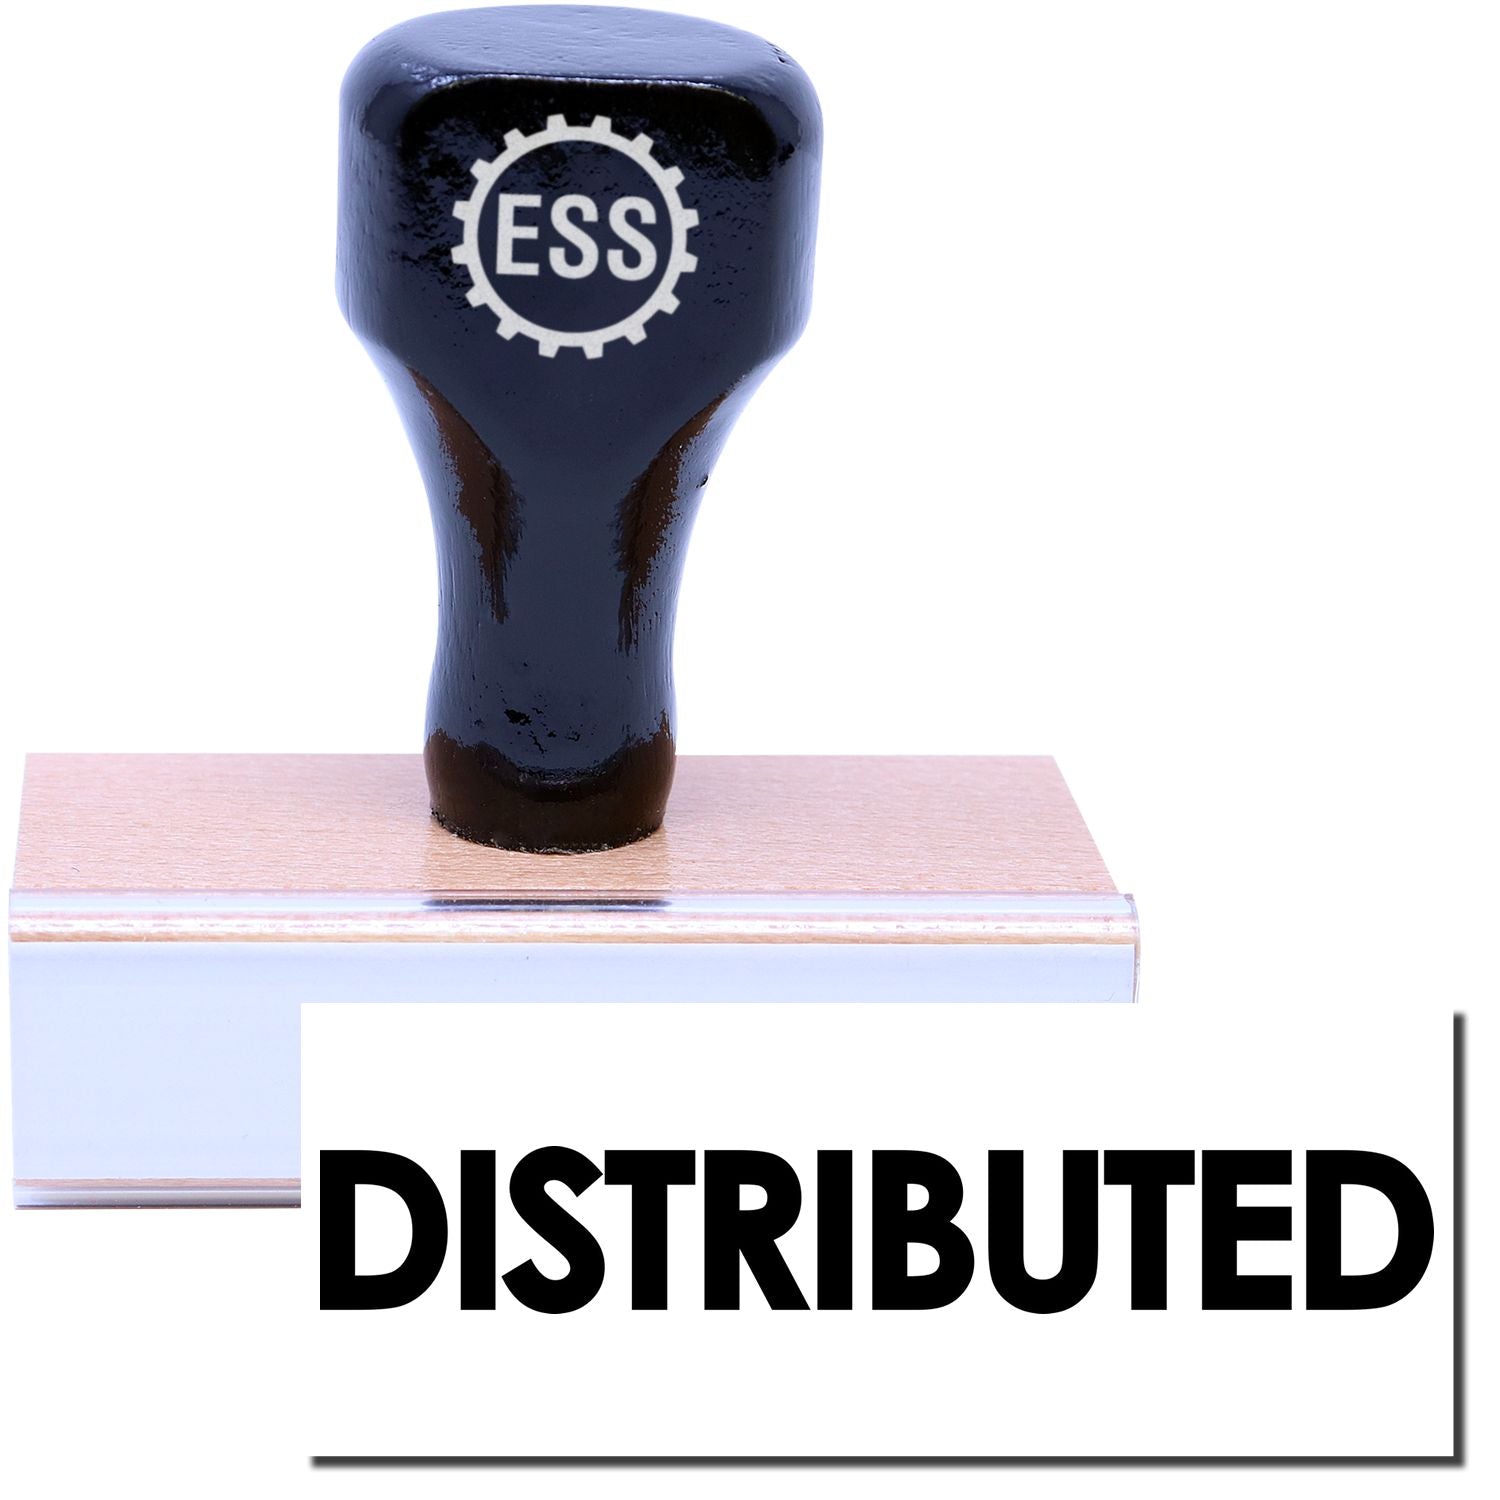 A stock office rubber stamp with a stamped image showing how the text "DISTRIBUTED" in bold font is displayed after stamping.